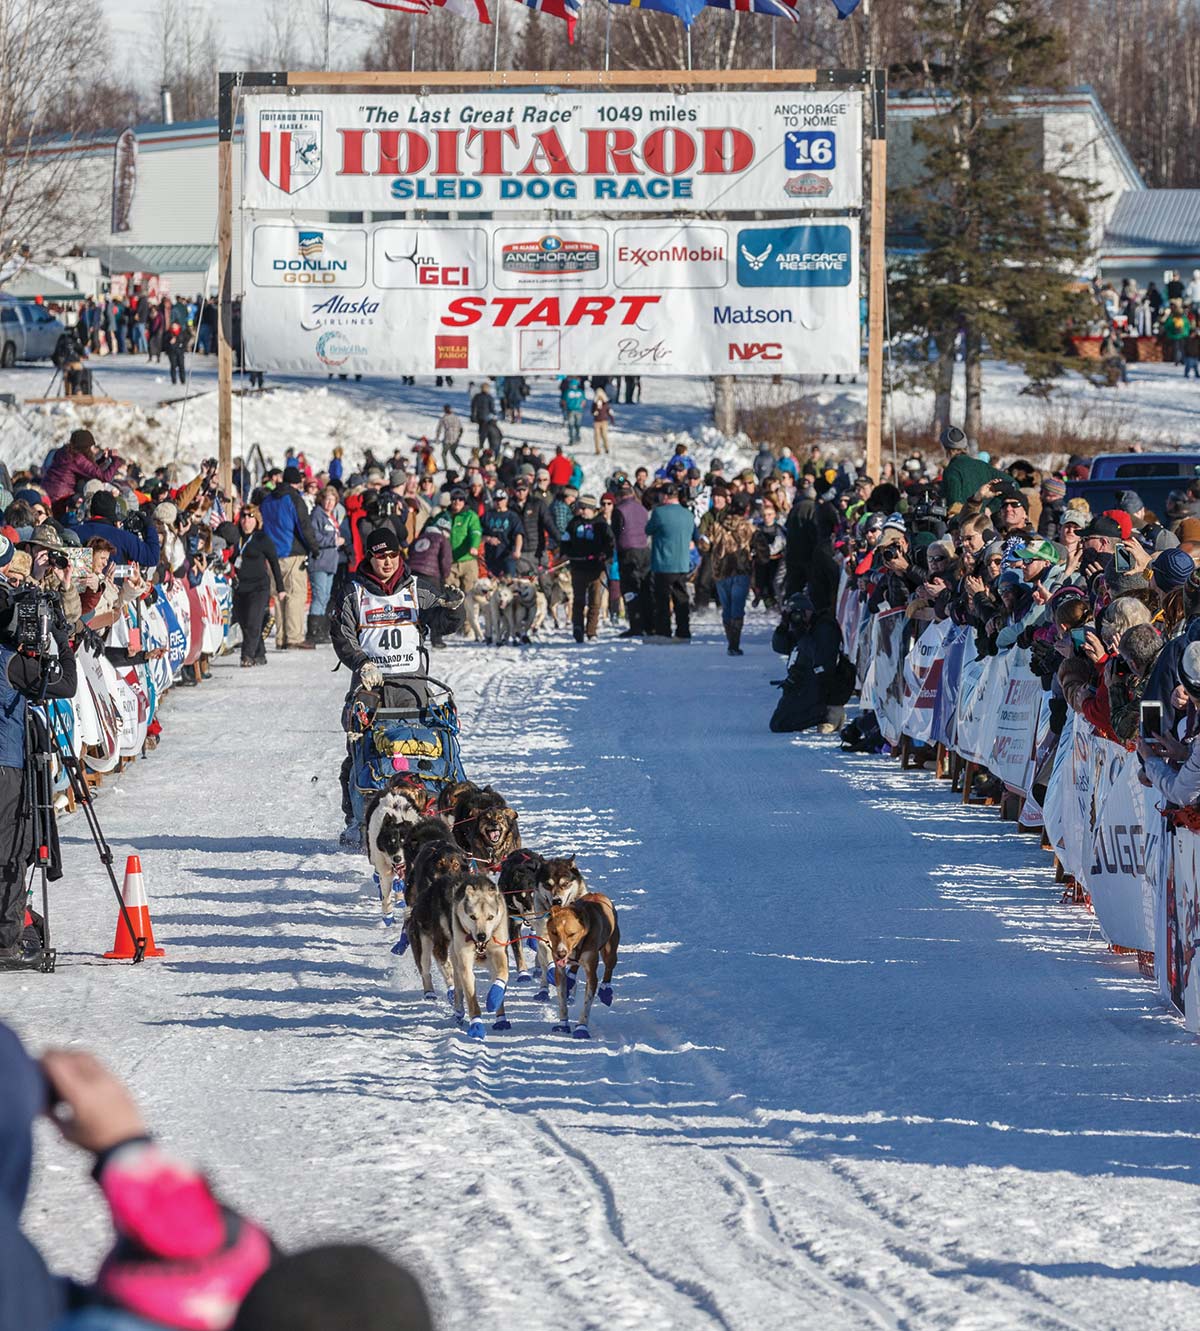 crowd clapping and cheering on Mike Williams Jr. as he leaves the start during the Ceremonial Start of the 2016 Iditarod in Willow, Alaska